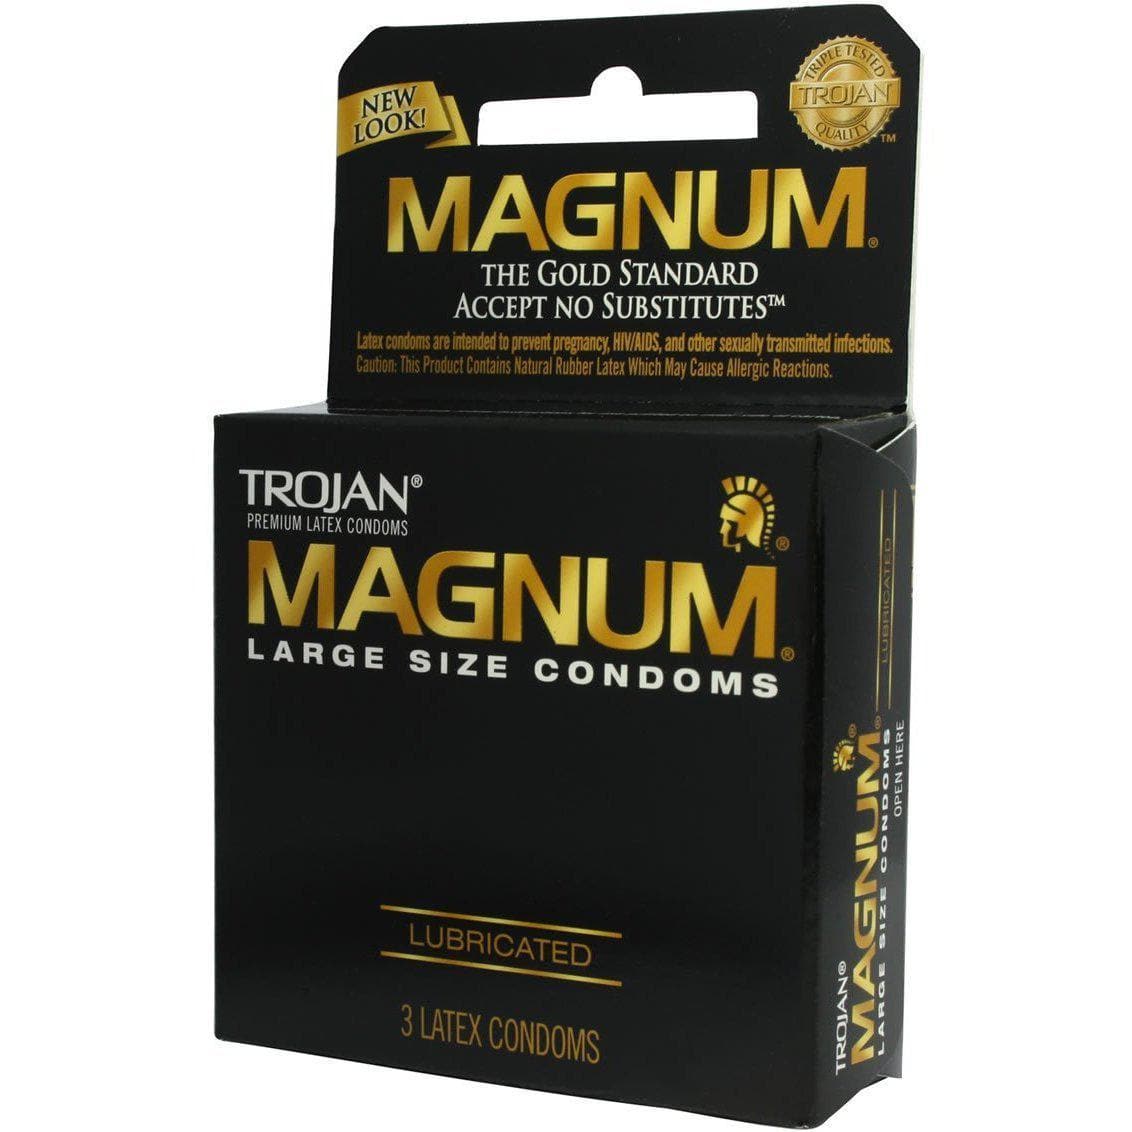 Trojan Condom Magnum Large Size Lubricated 3 Pack - Romantic Blessings